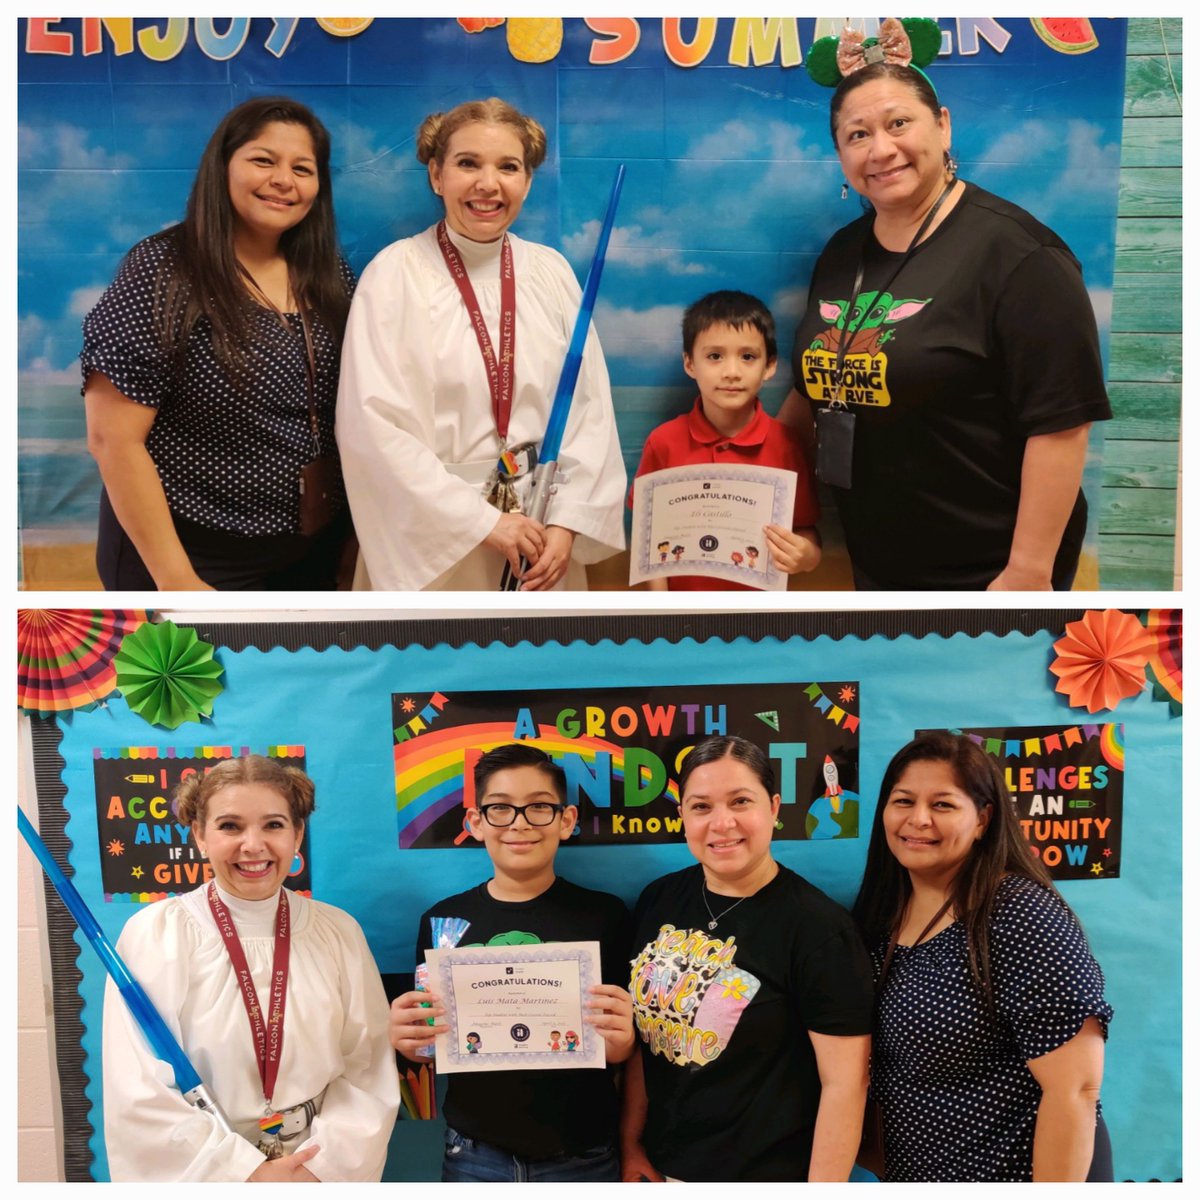 Congratulations to these wonderful students from @RanchoVerdeElem who won the Imagine Math Campus Top Student contest: Eli (Kinder) and Luis (4th grade)!! 🏆🎉👏 @CanasElodia @ImagineLearning @tudon26